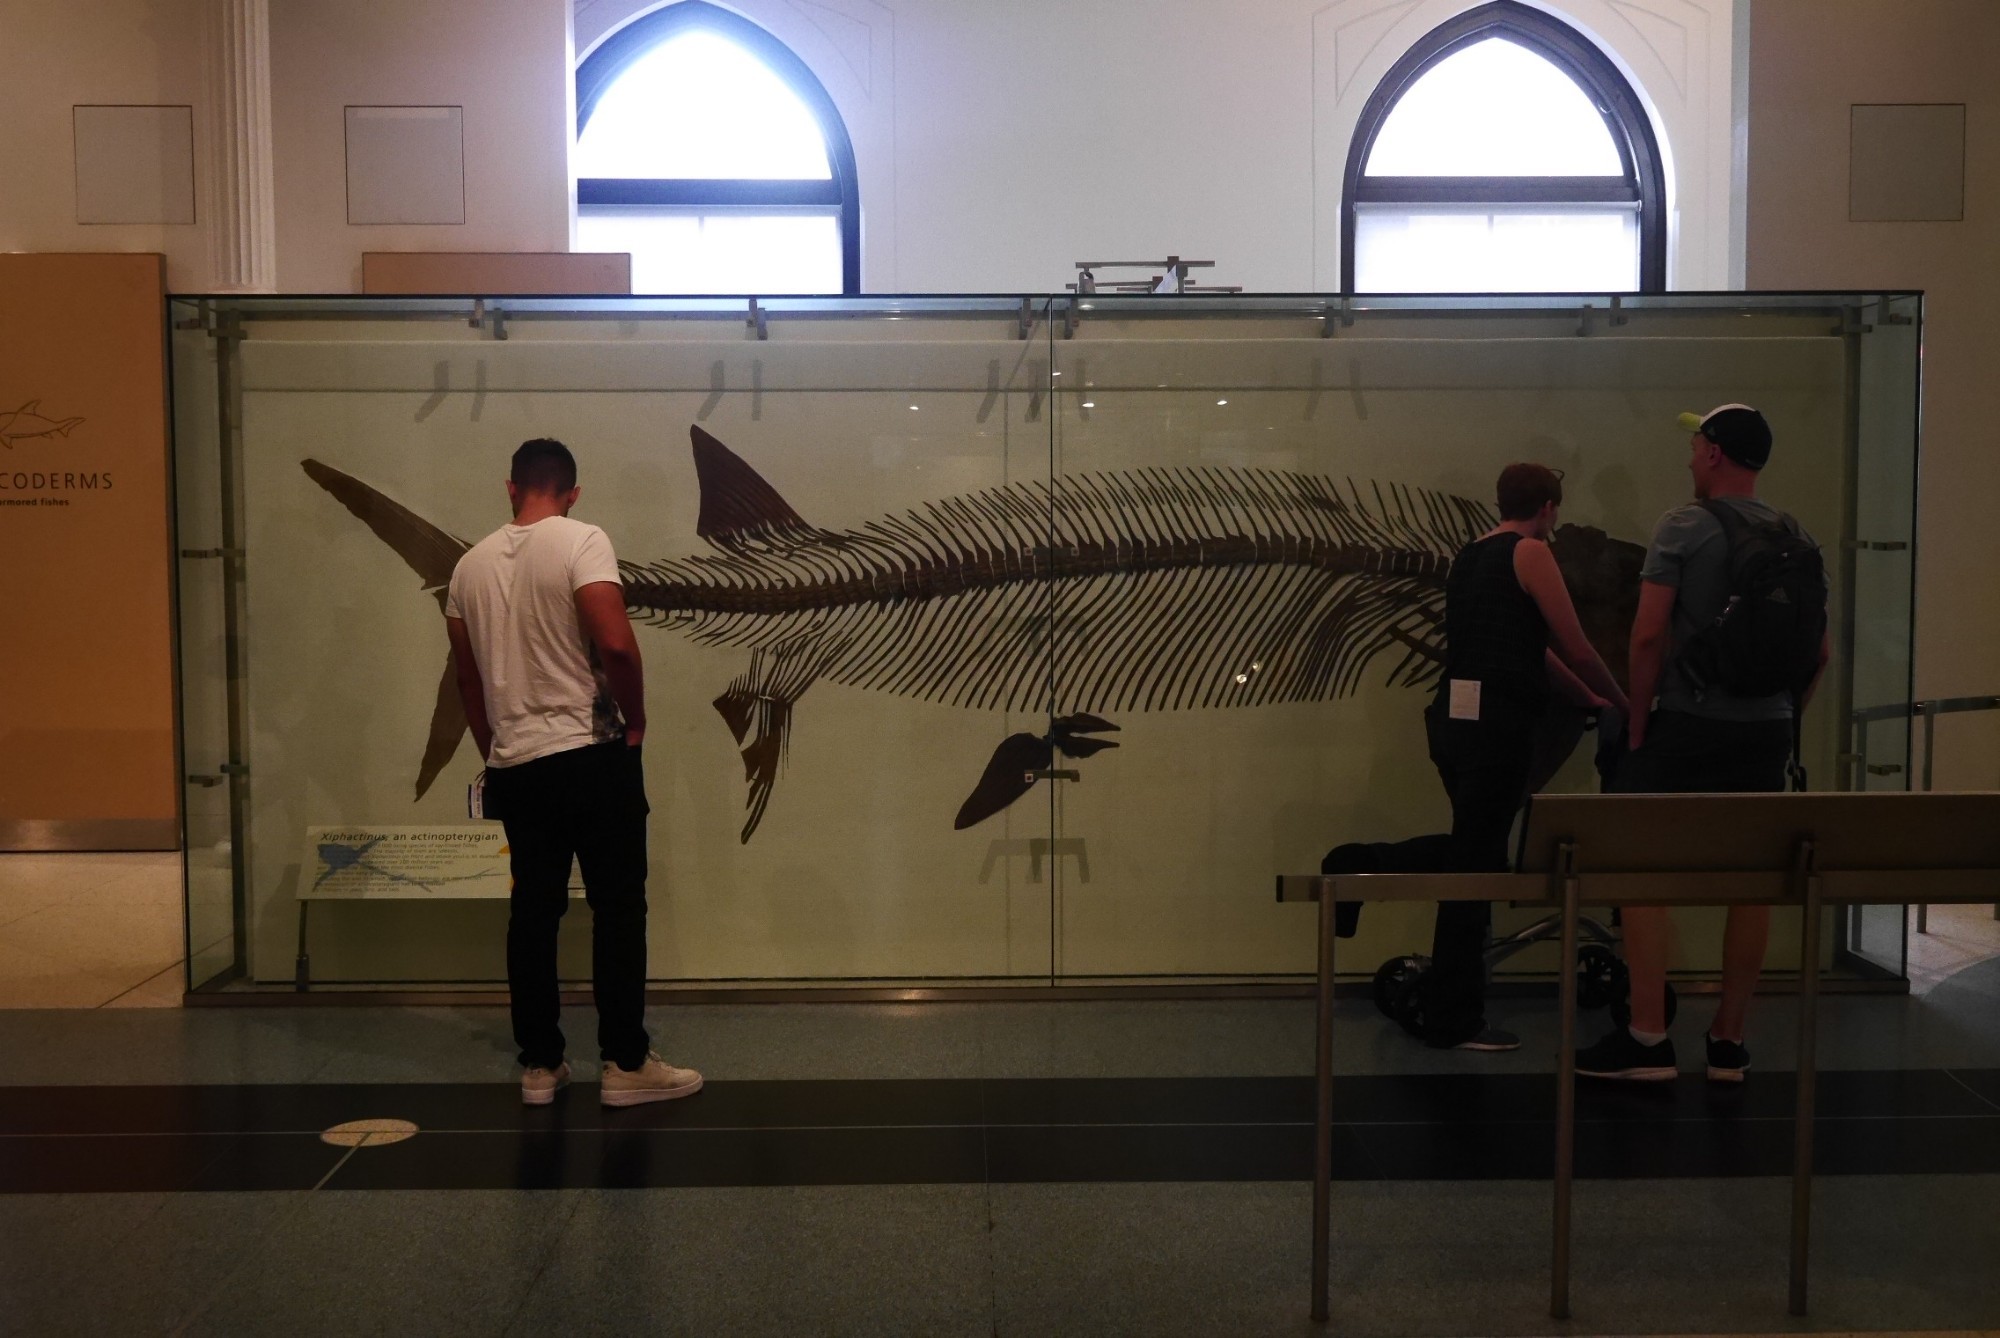 American Museum Of Natural History<br/>
New York,NY